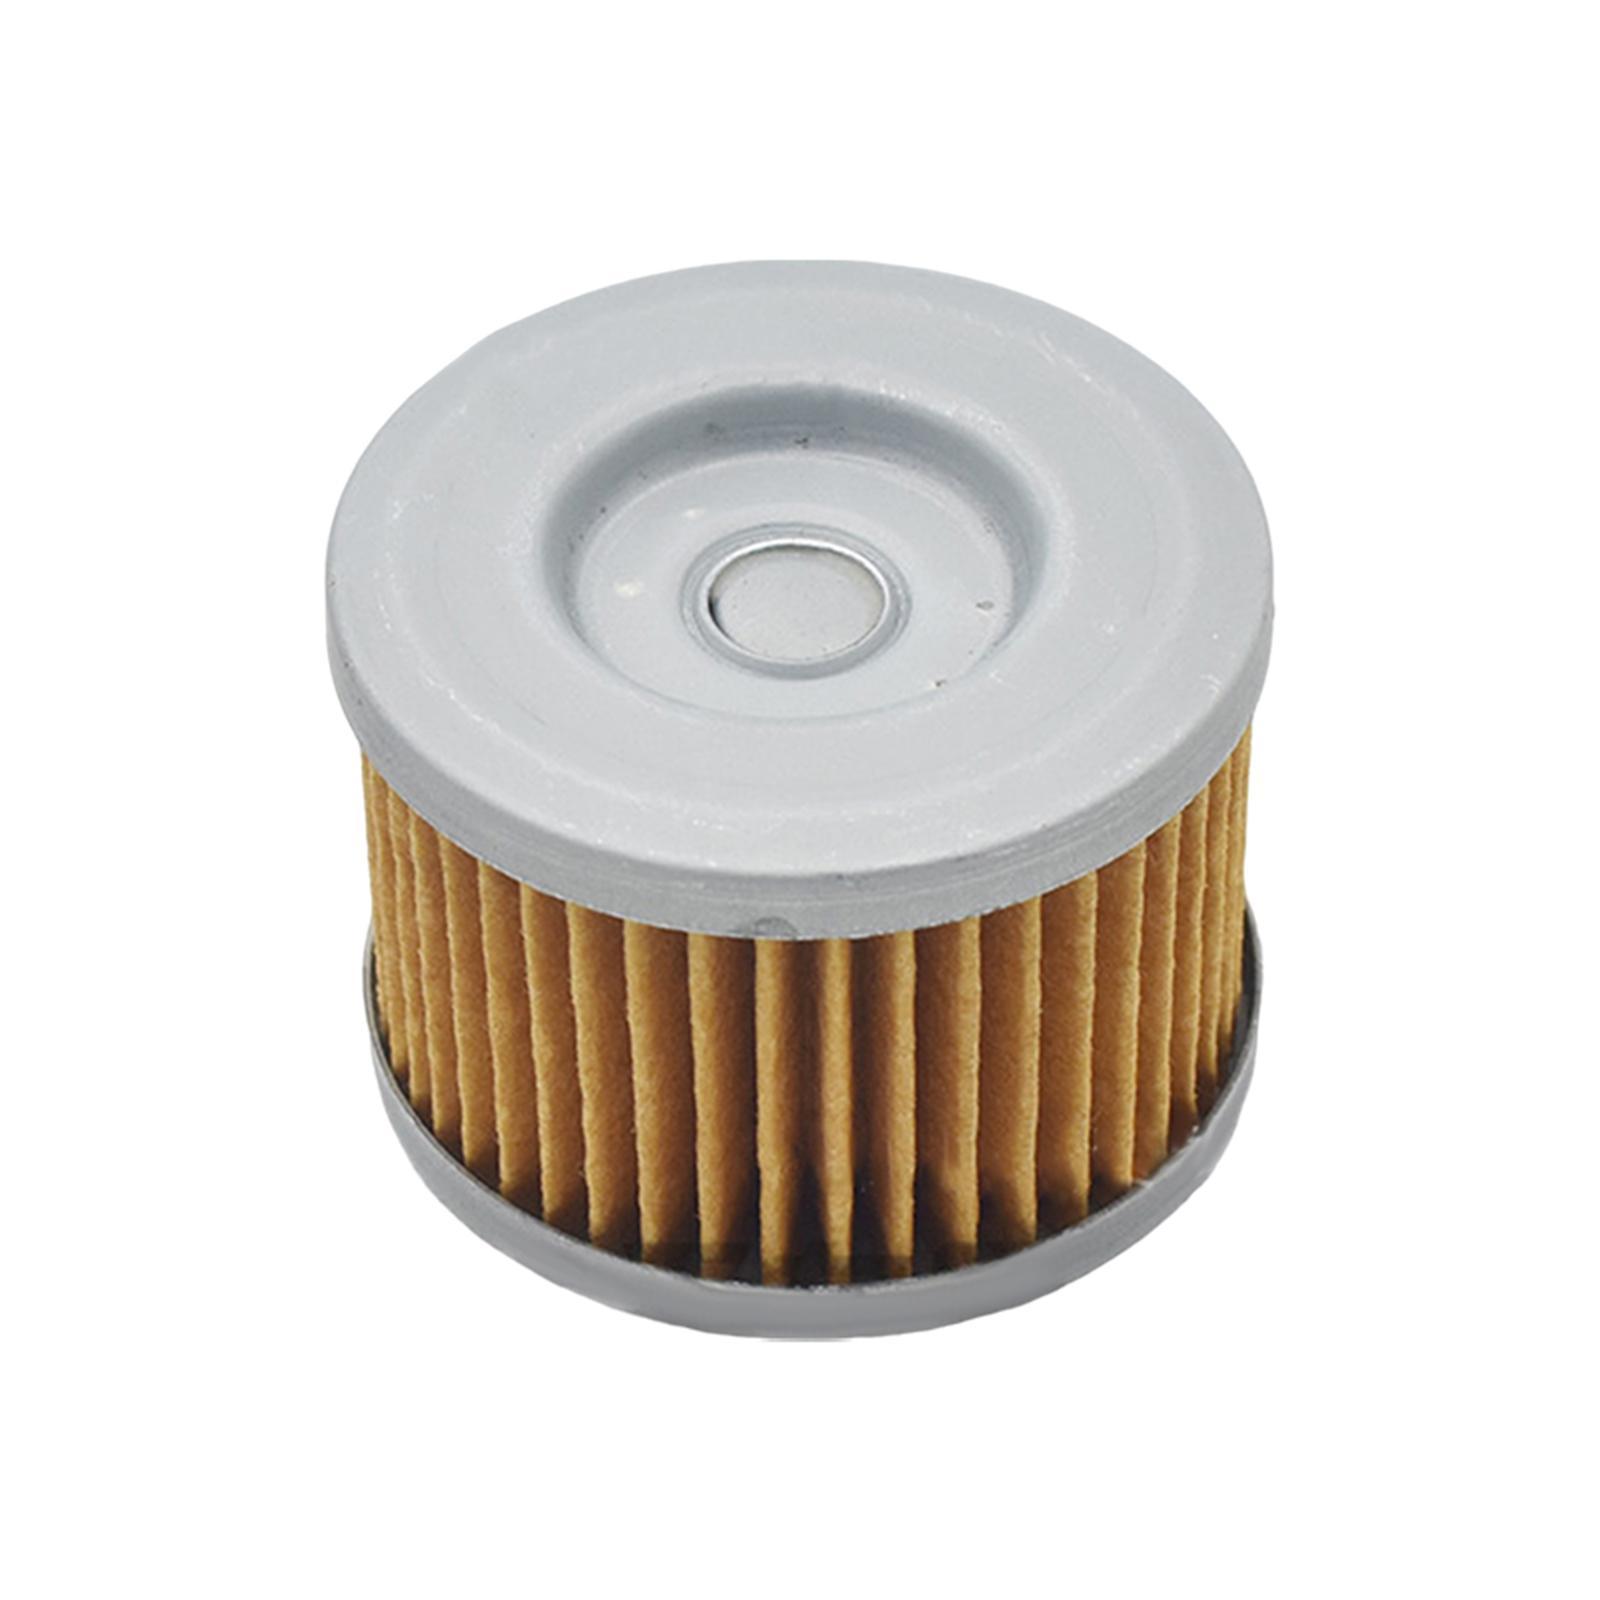 3xOil Filter for for Suzuki SP250 GZ250 DR250 DR350 DR400 TU250 350